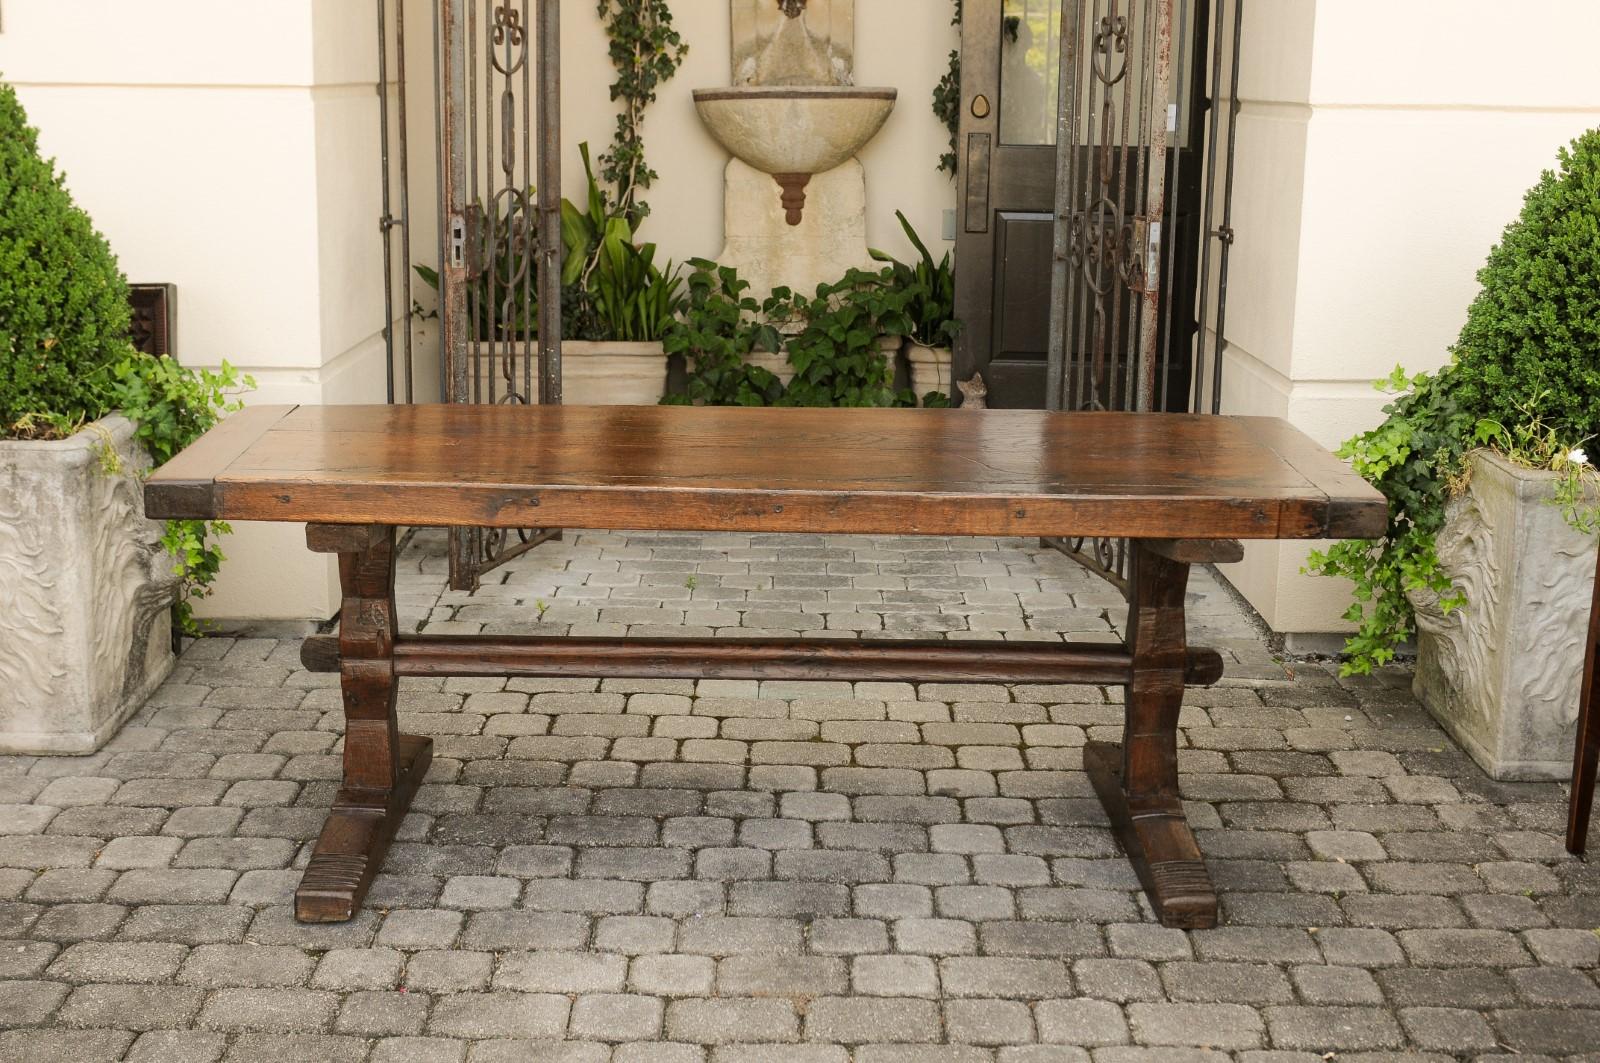 19th Century French Oak Farm Table with Trestle Base and Weathered Patina, circa 1880